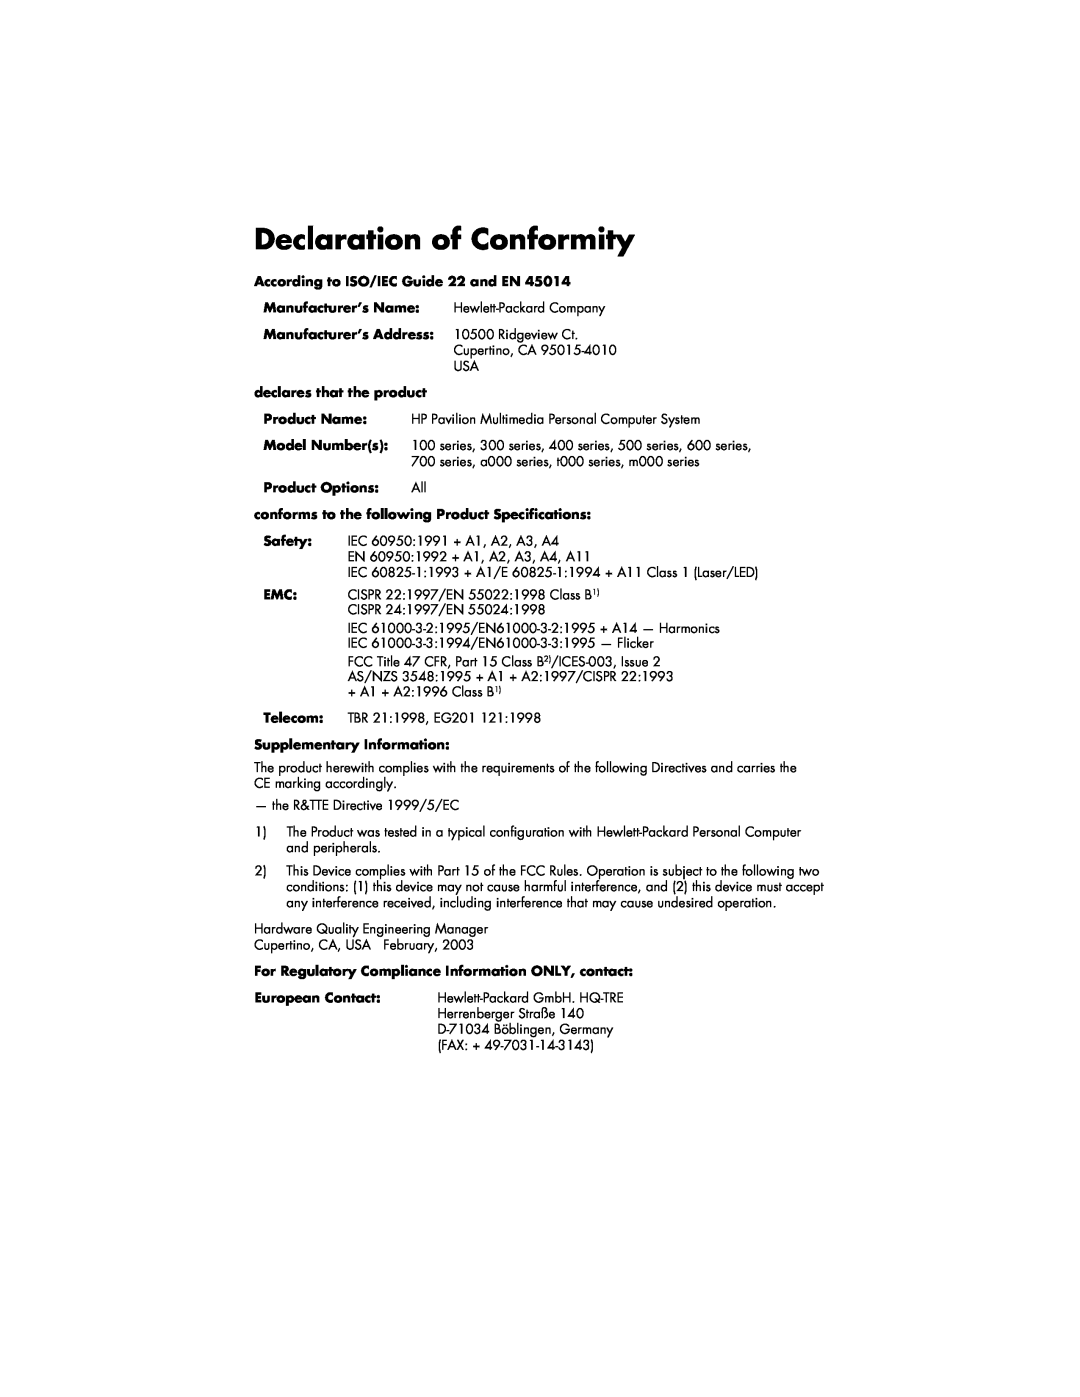 HP a118.uk Declaration of Conformity, According to ISO/IEC Guide 22 and EN, Manufacturer’s Address 10500 Ridgeview Ct 